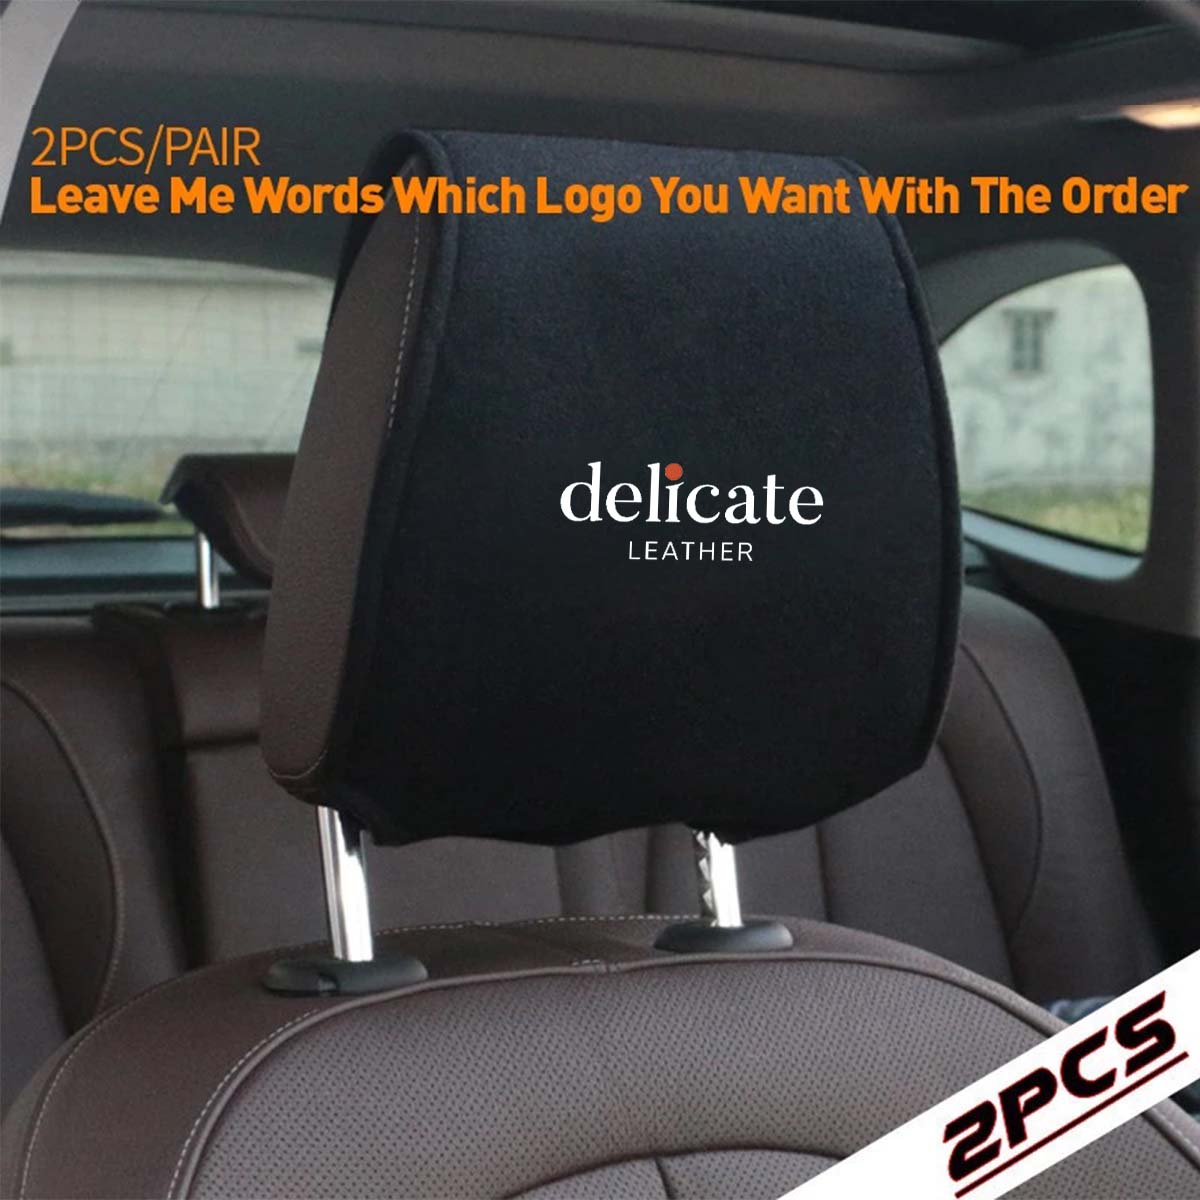 Delicate Leather Car Seat Headrest Cover Breathable Flexible Headrest Covers Velcro Auto Headrest Covers Universal Fit, Custom For Your Cars, Car Accessories CH13998 - Delicate Leather